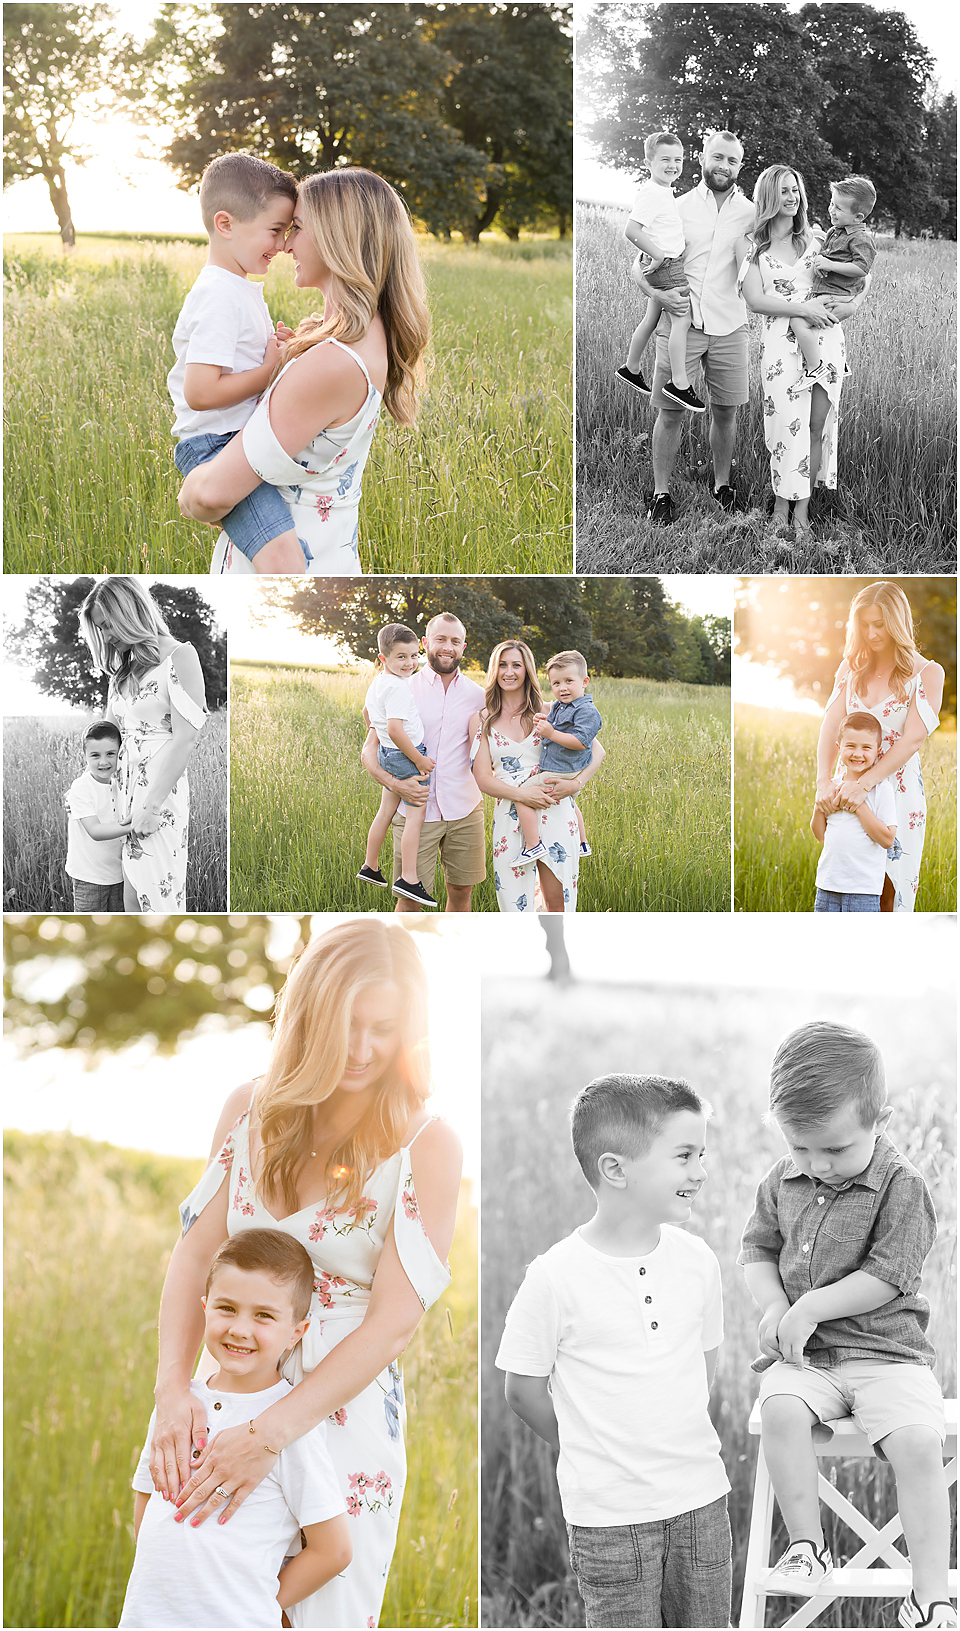 Best Family Photographers in CT | On Location CT Family Photography | CT Family Photographer | Western MA Family Photography | CT Photography | www.kellidease.com